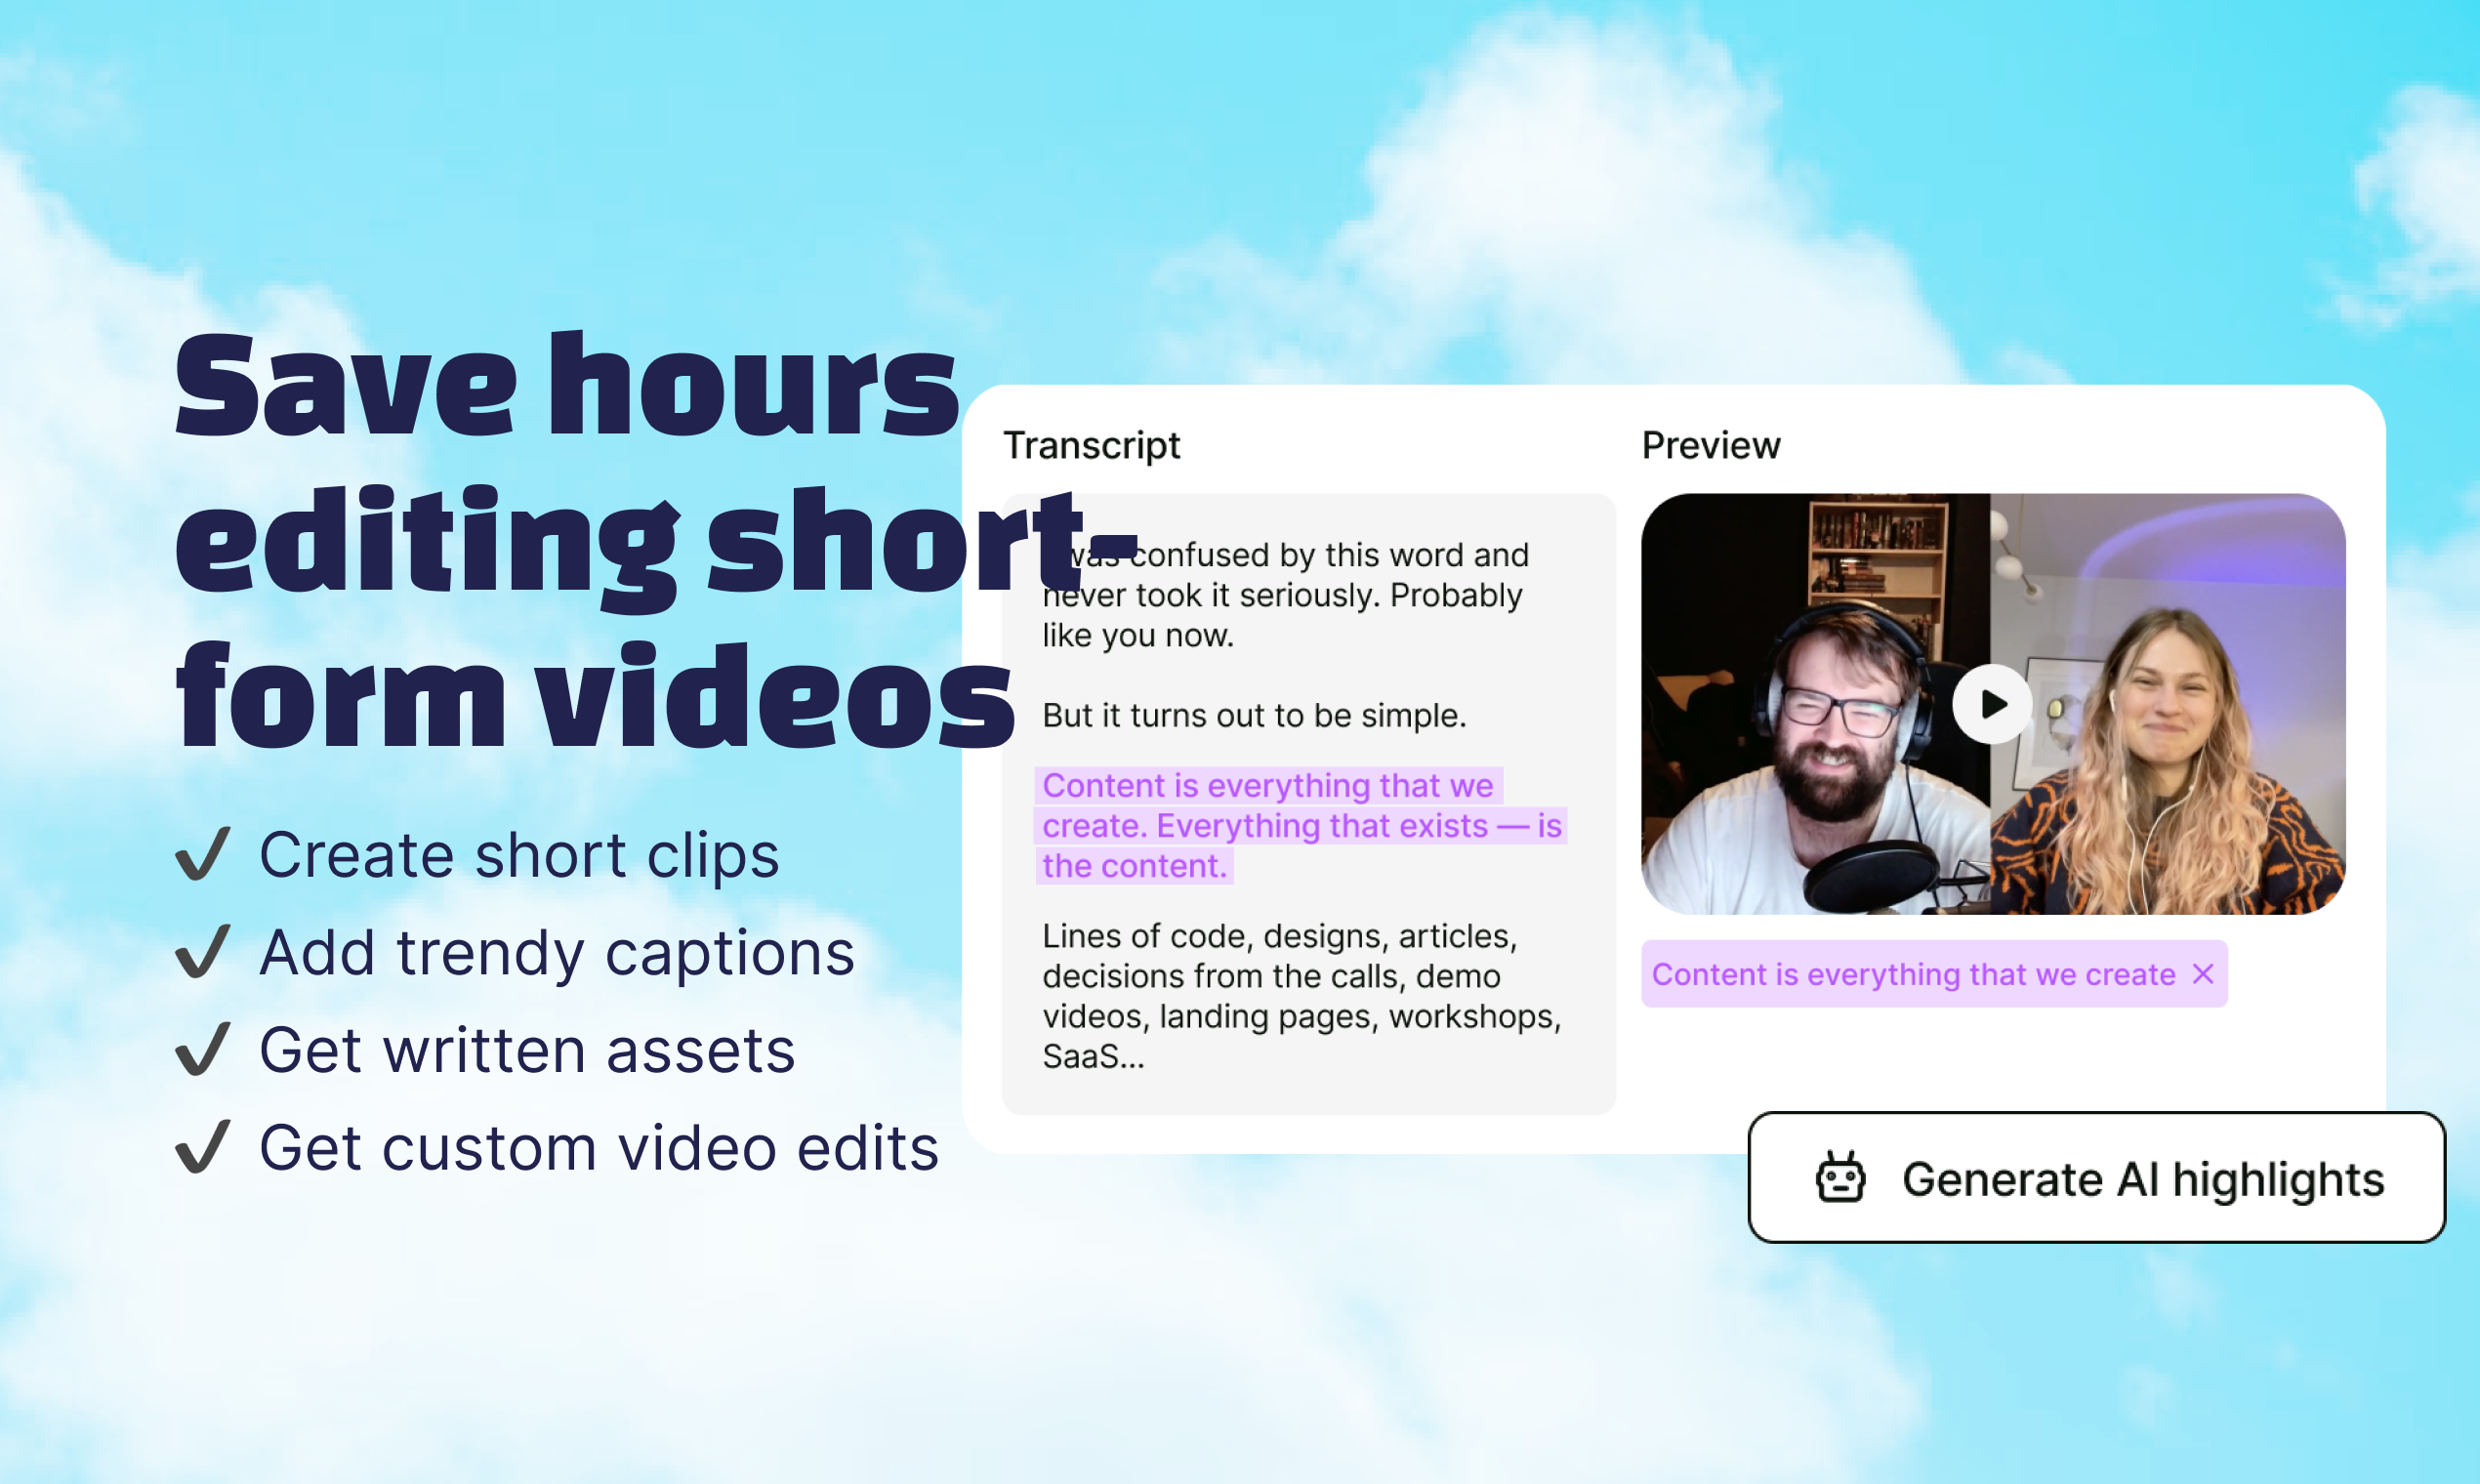 clipwing - Your video content is great and it deserves more views